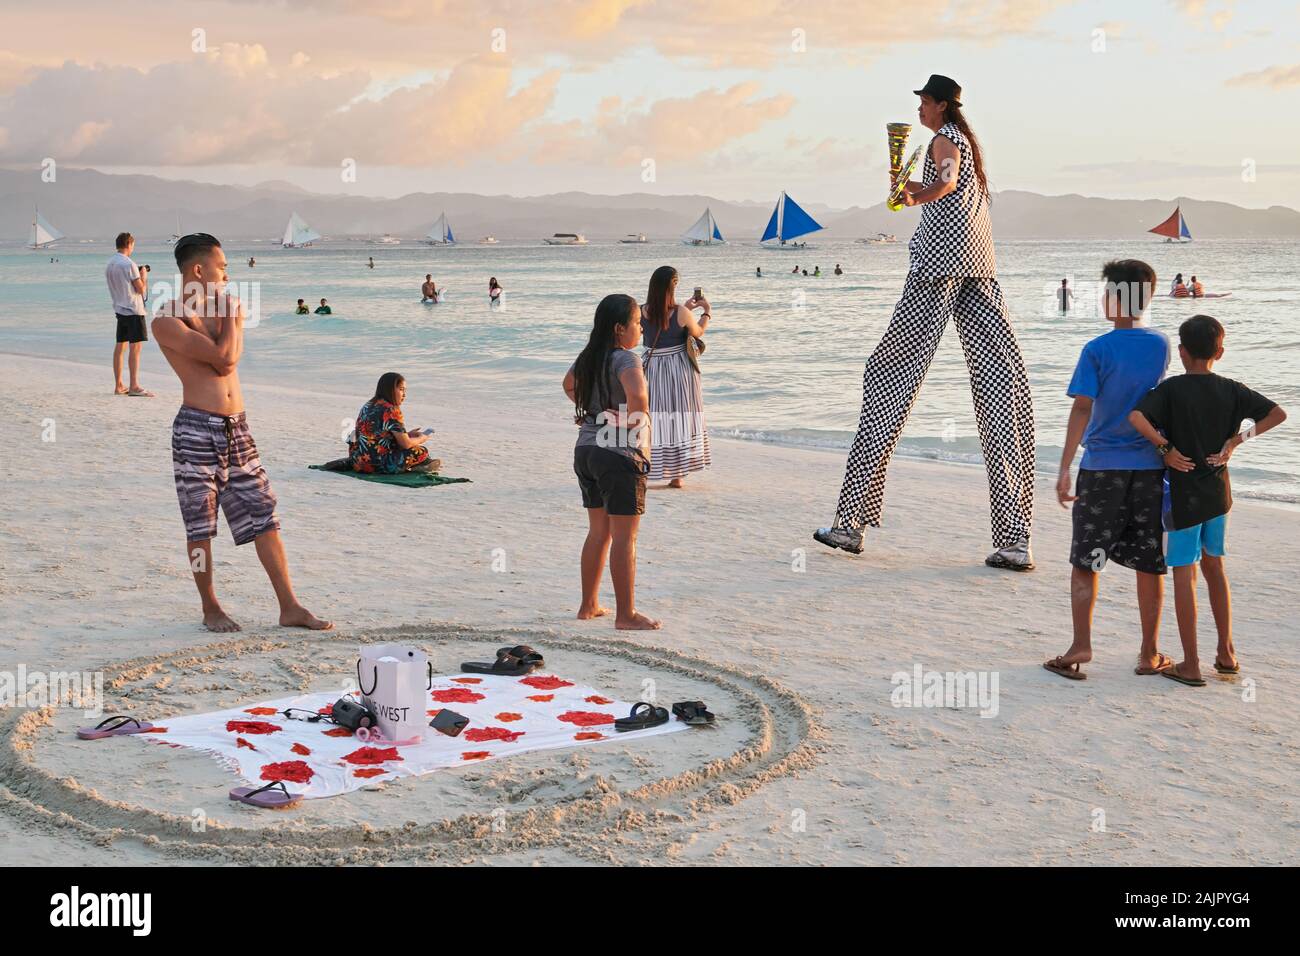 Boracay, Aklan, Philippines: Man on stilts doing juggling along the White Beach at sunset, with local tourists as spectators. Stock Photo